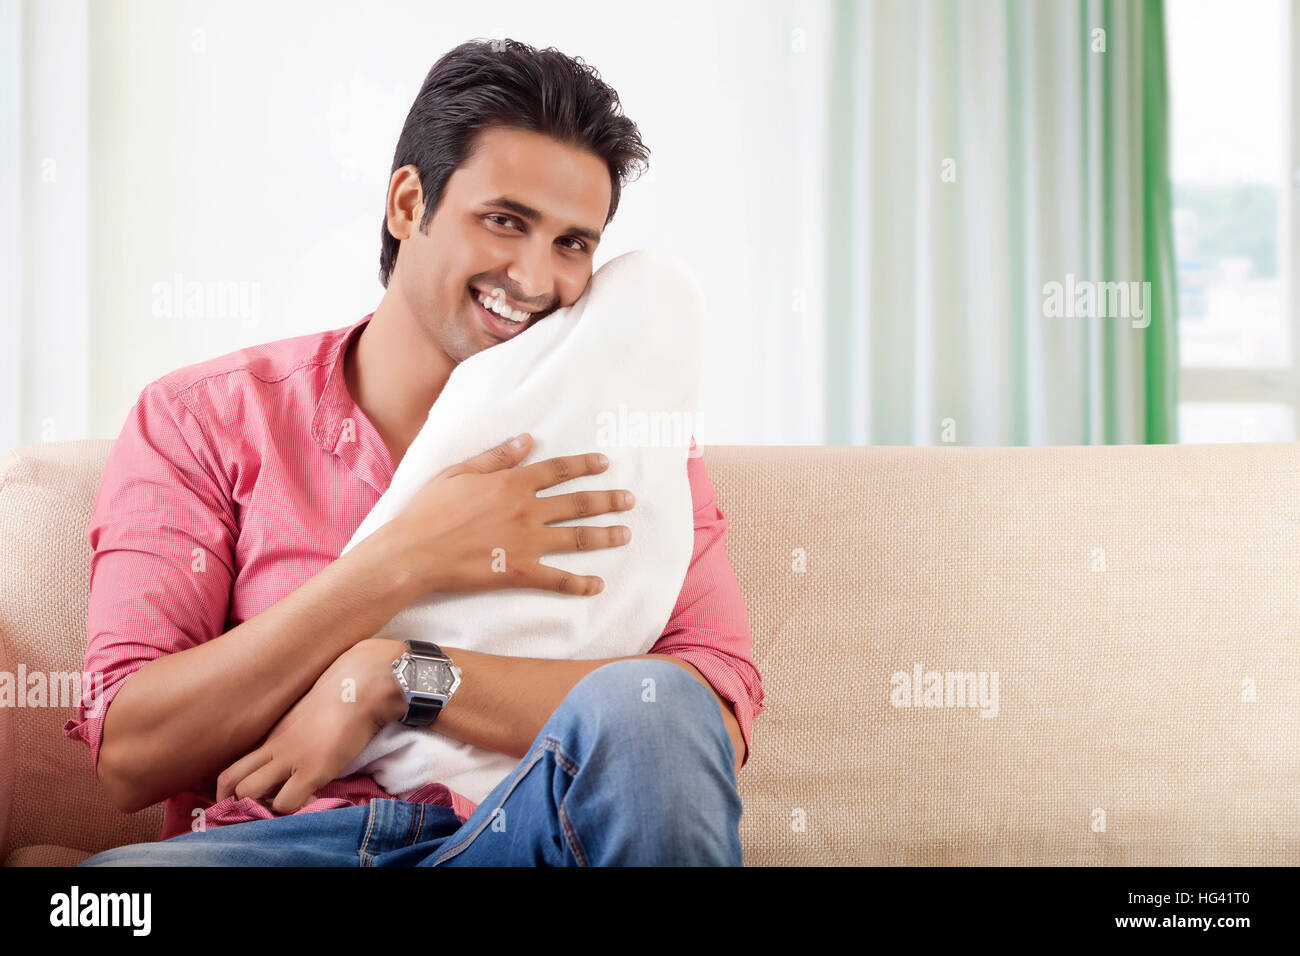 Smiling father holding baby Banque D'Images